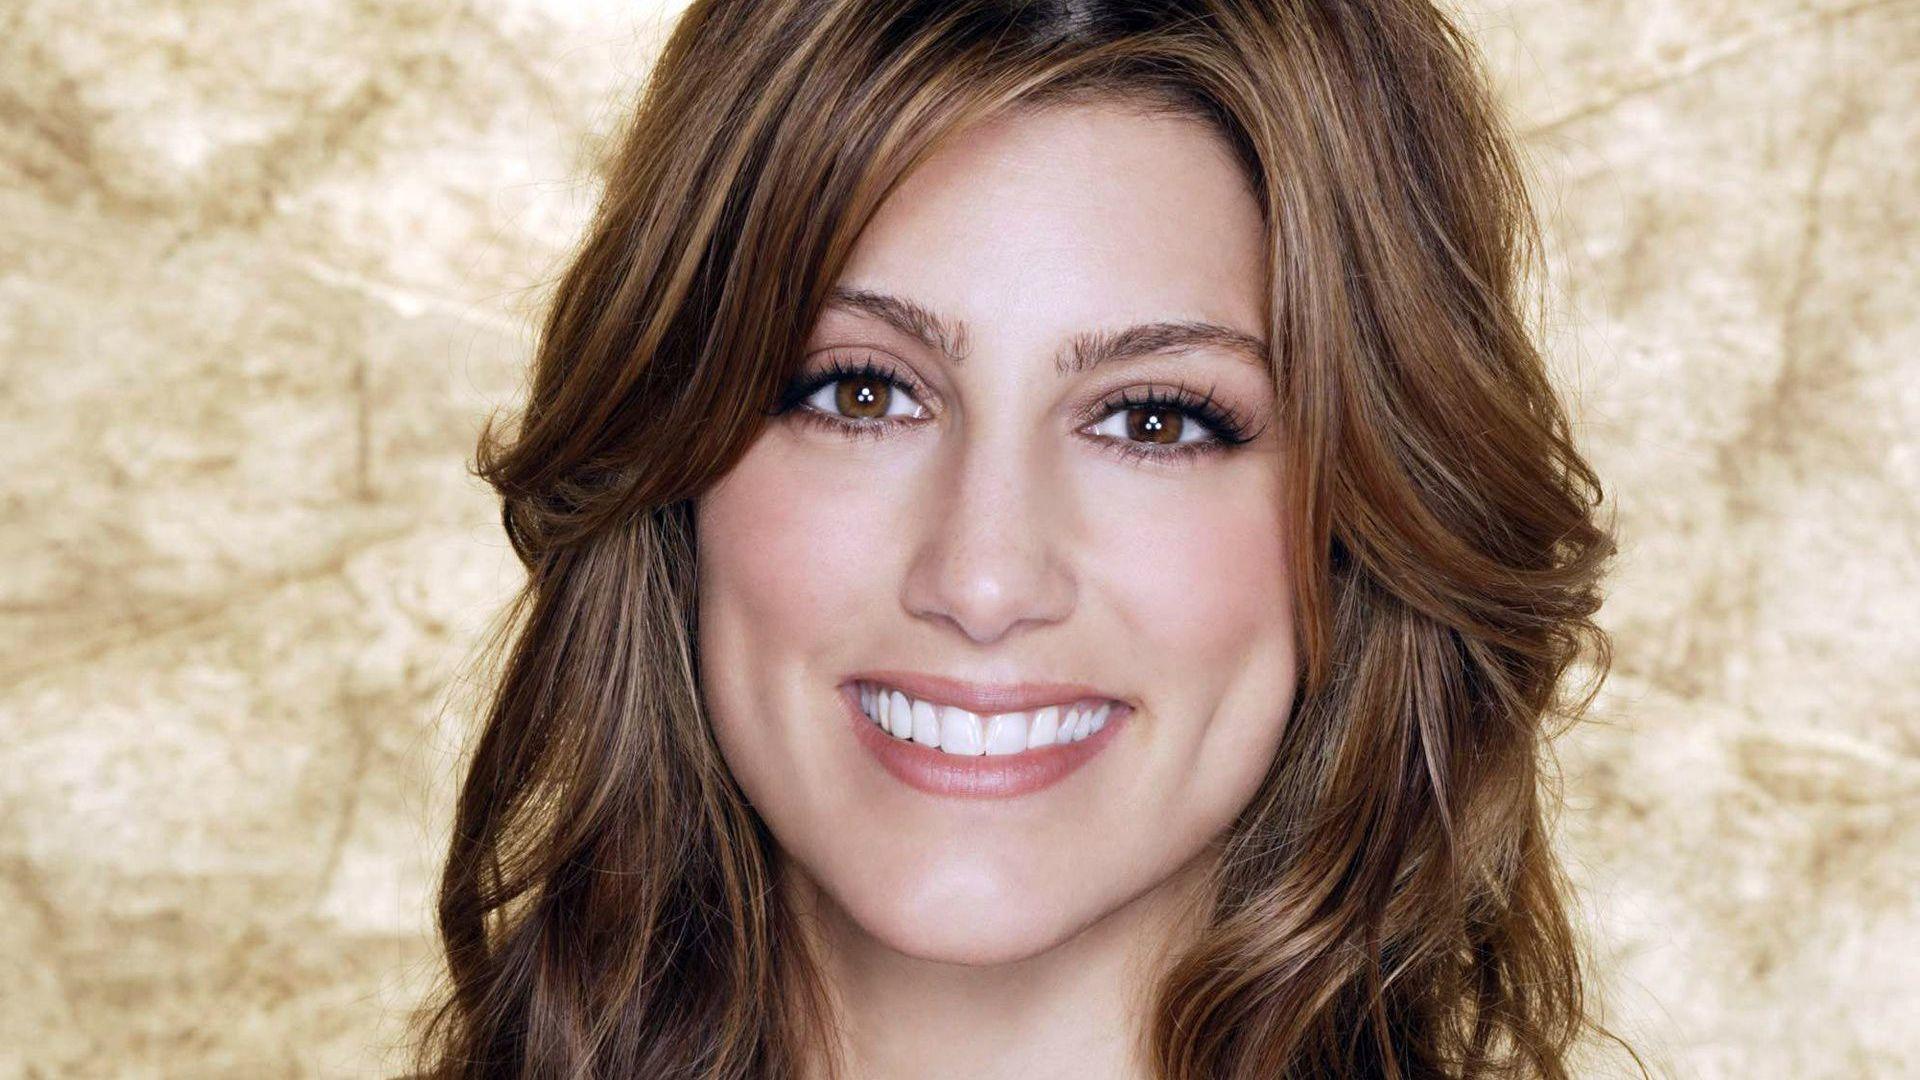 Jennifer Esposito Face Wallpapers 57489 1920x1080px.